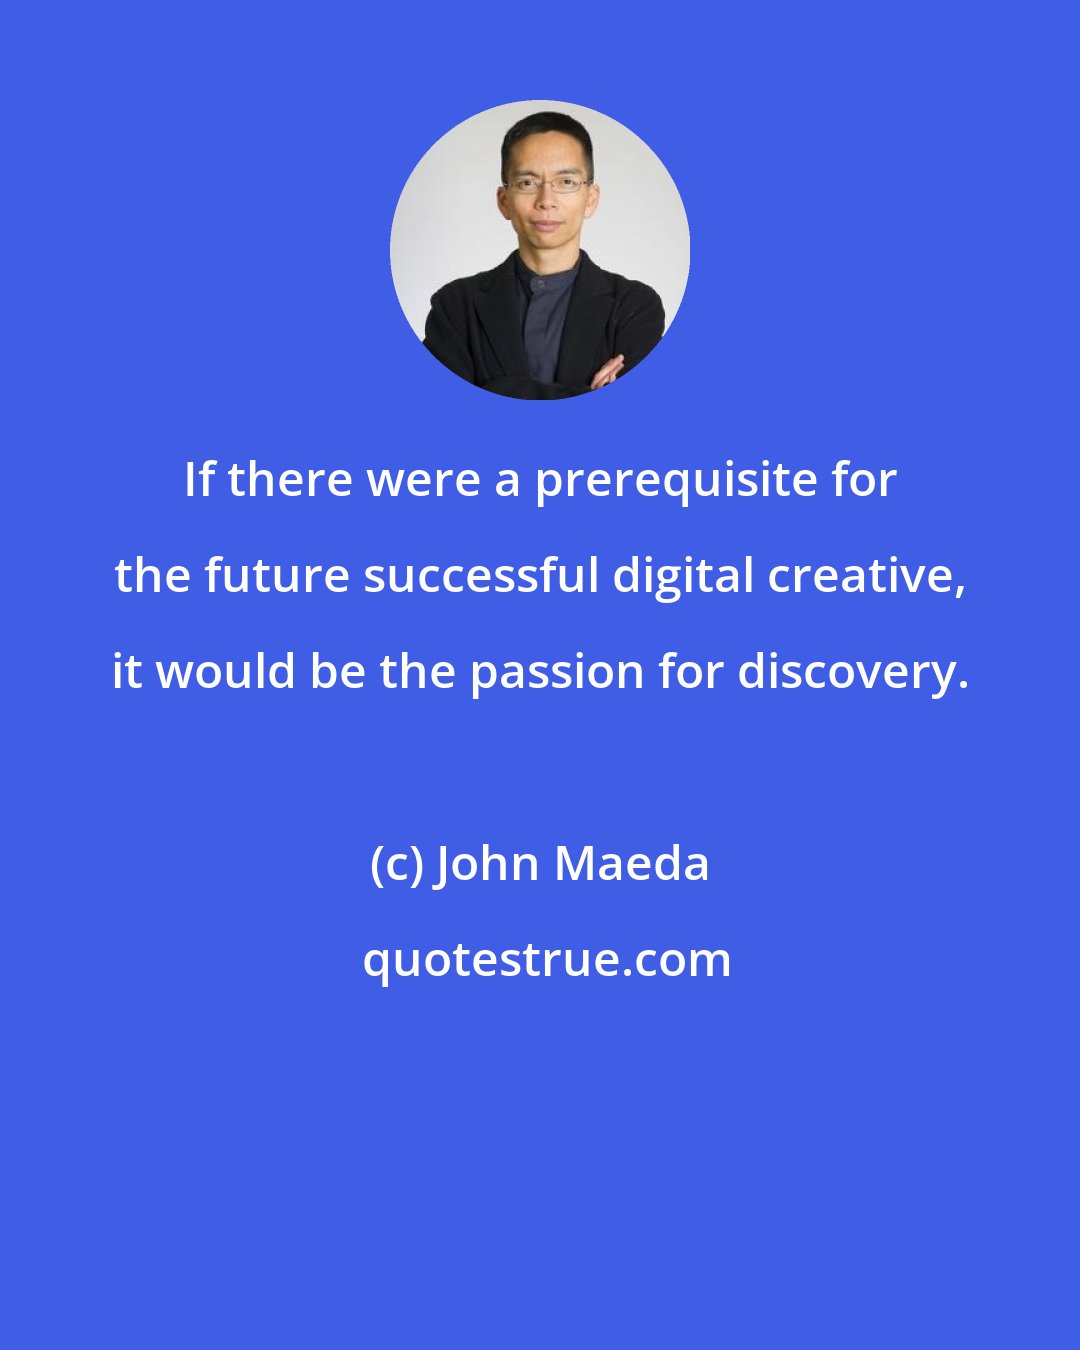 John Maeda: If there were a prerequisite for the future successful digital creative, it would be the passion for discovery.